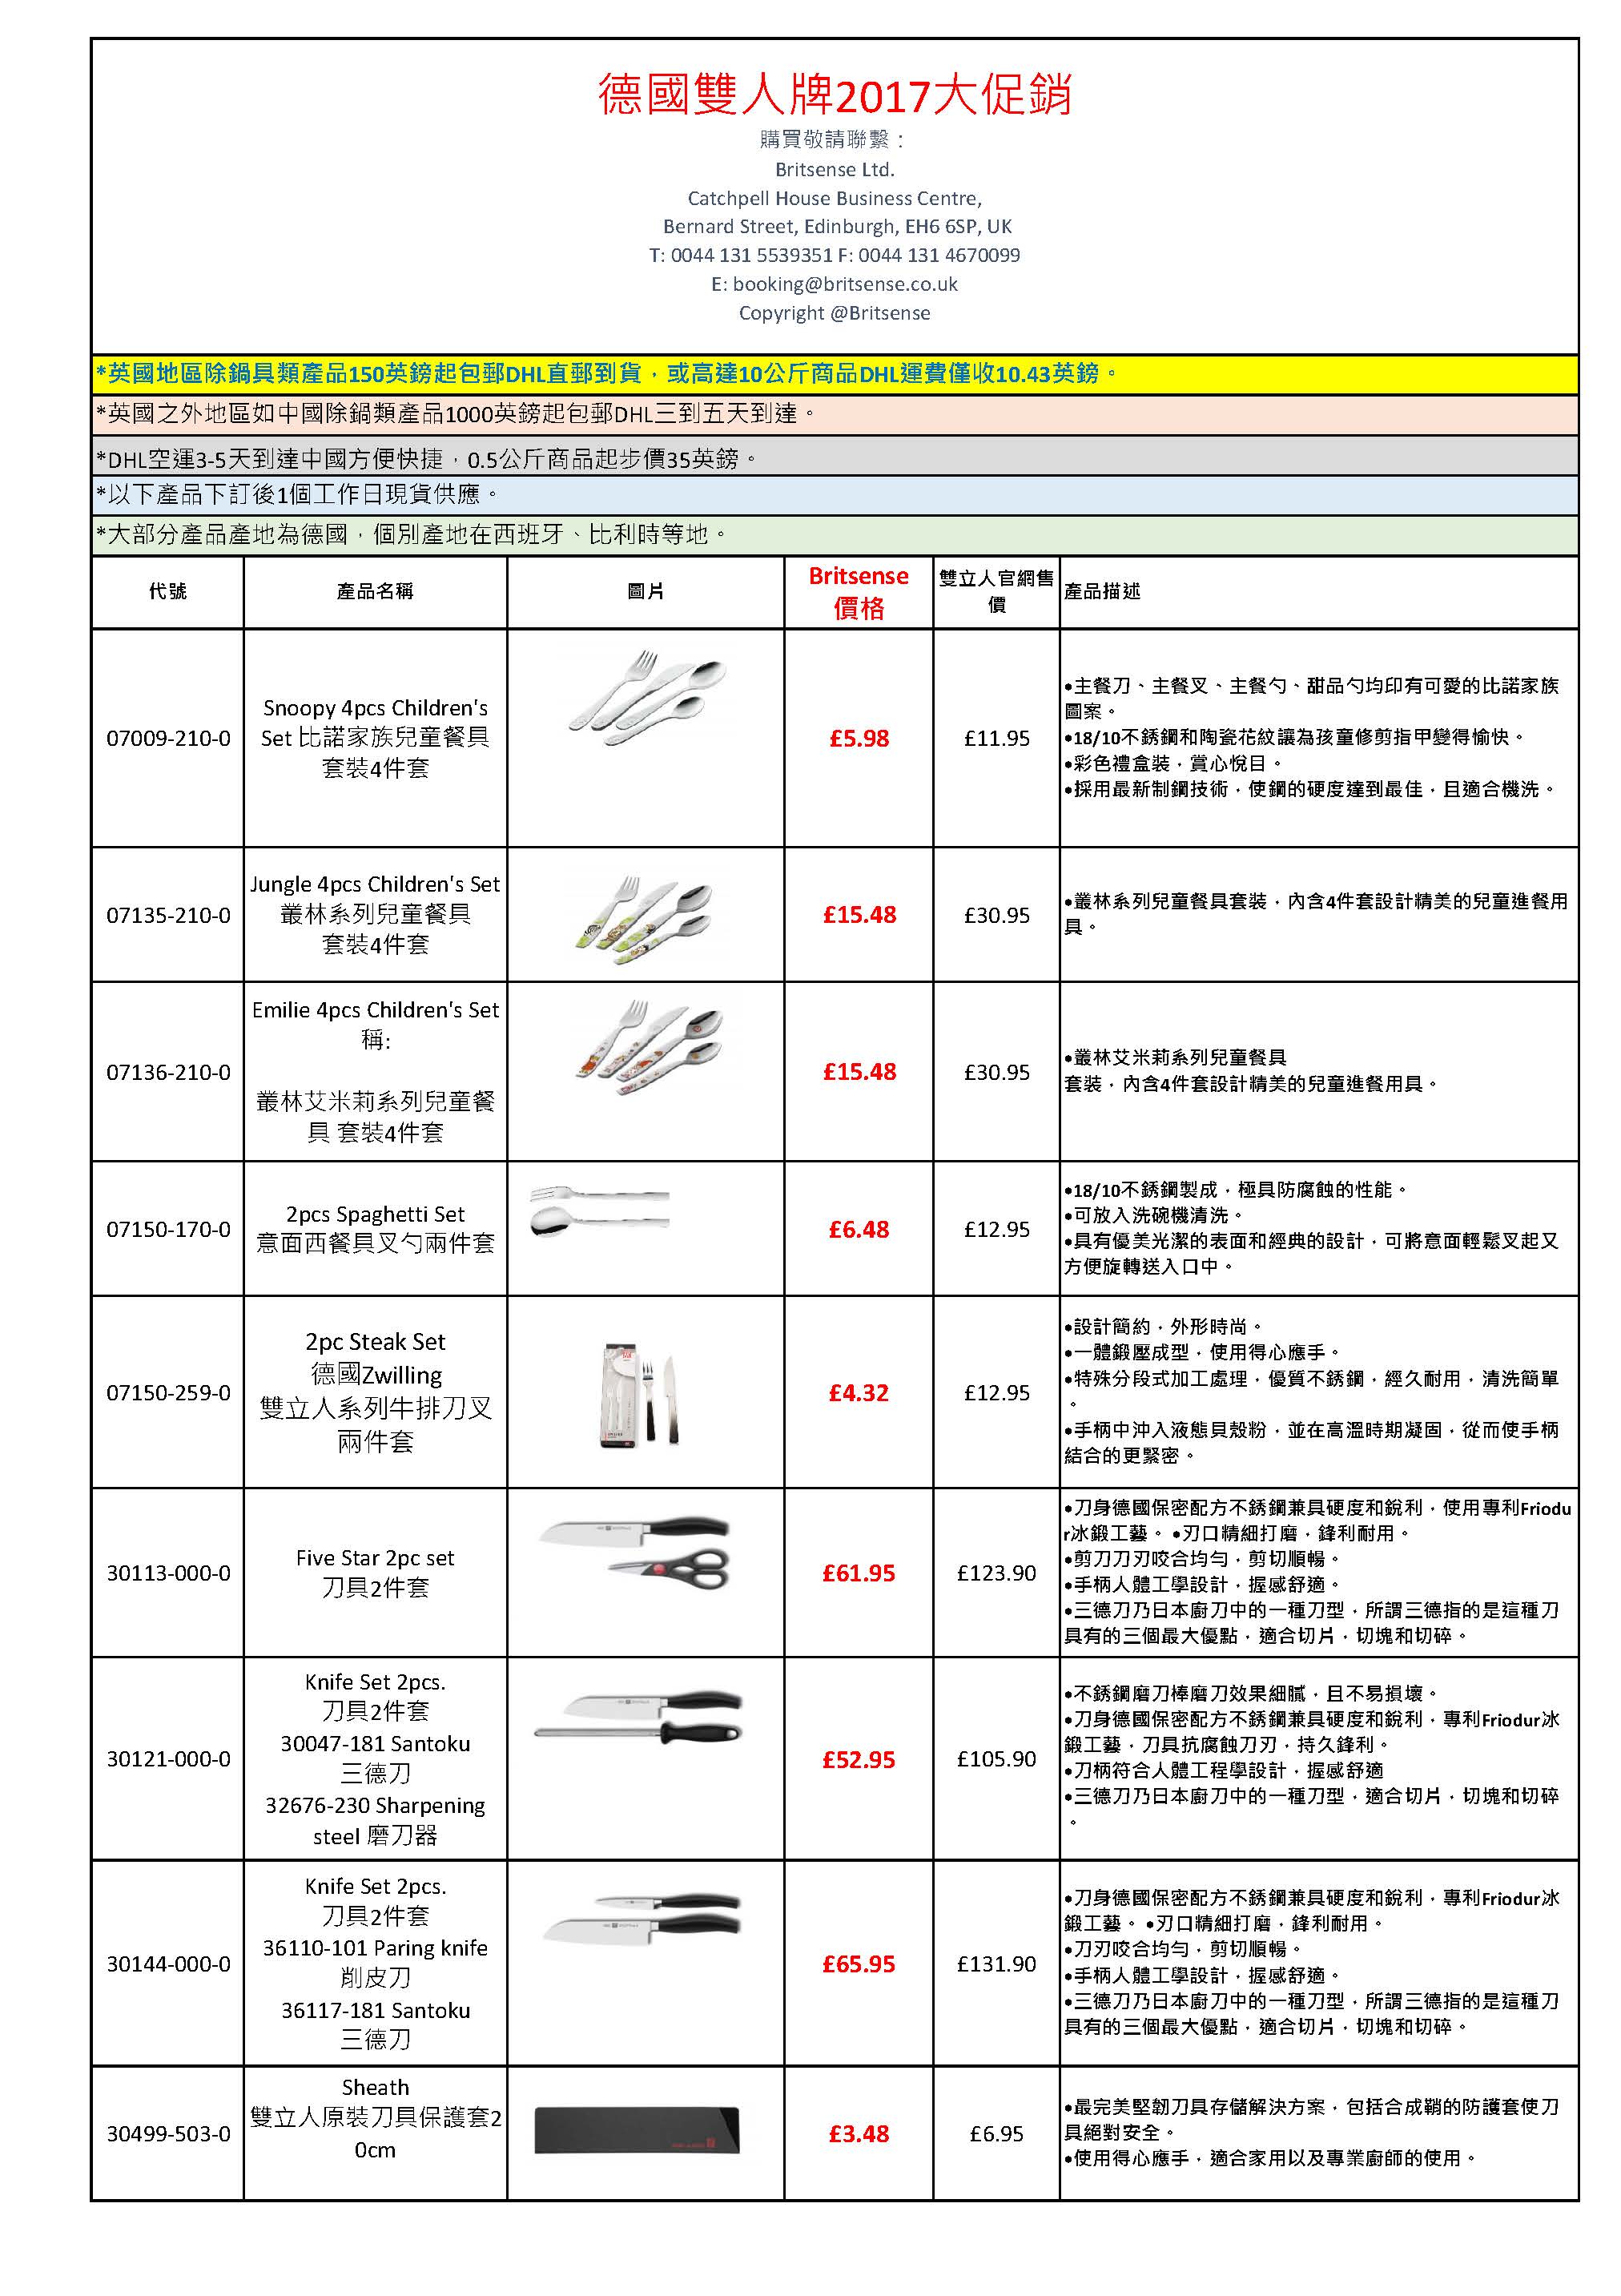 01032017 Britsense Full Sales List Traditional Chinese Version_Page_1.jpg